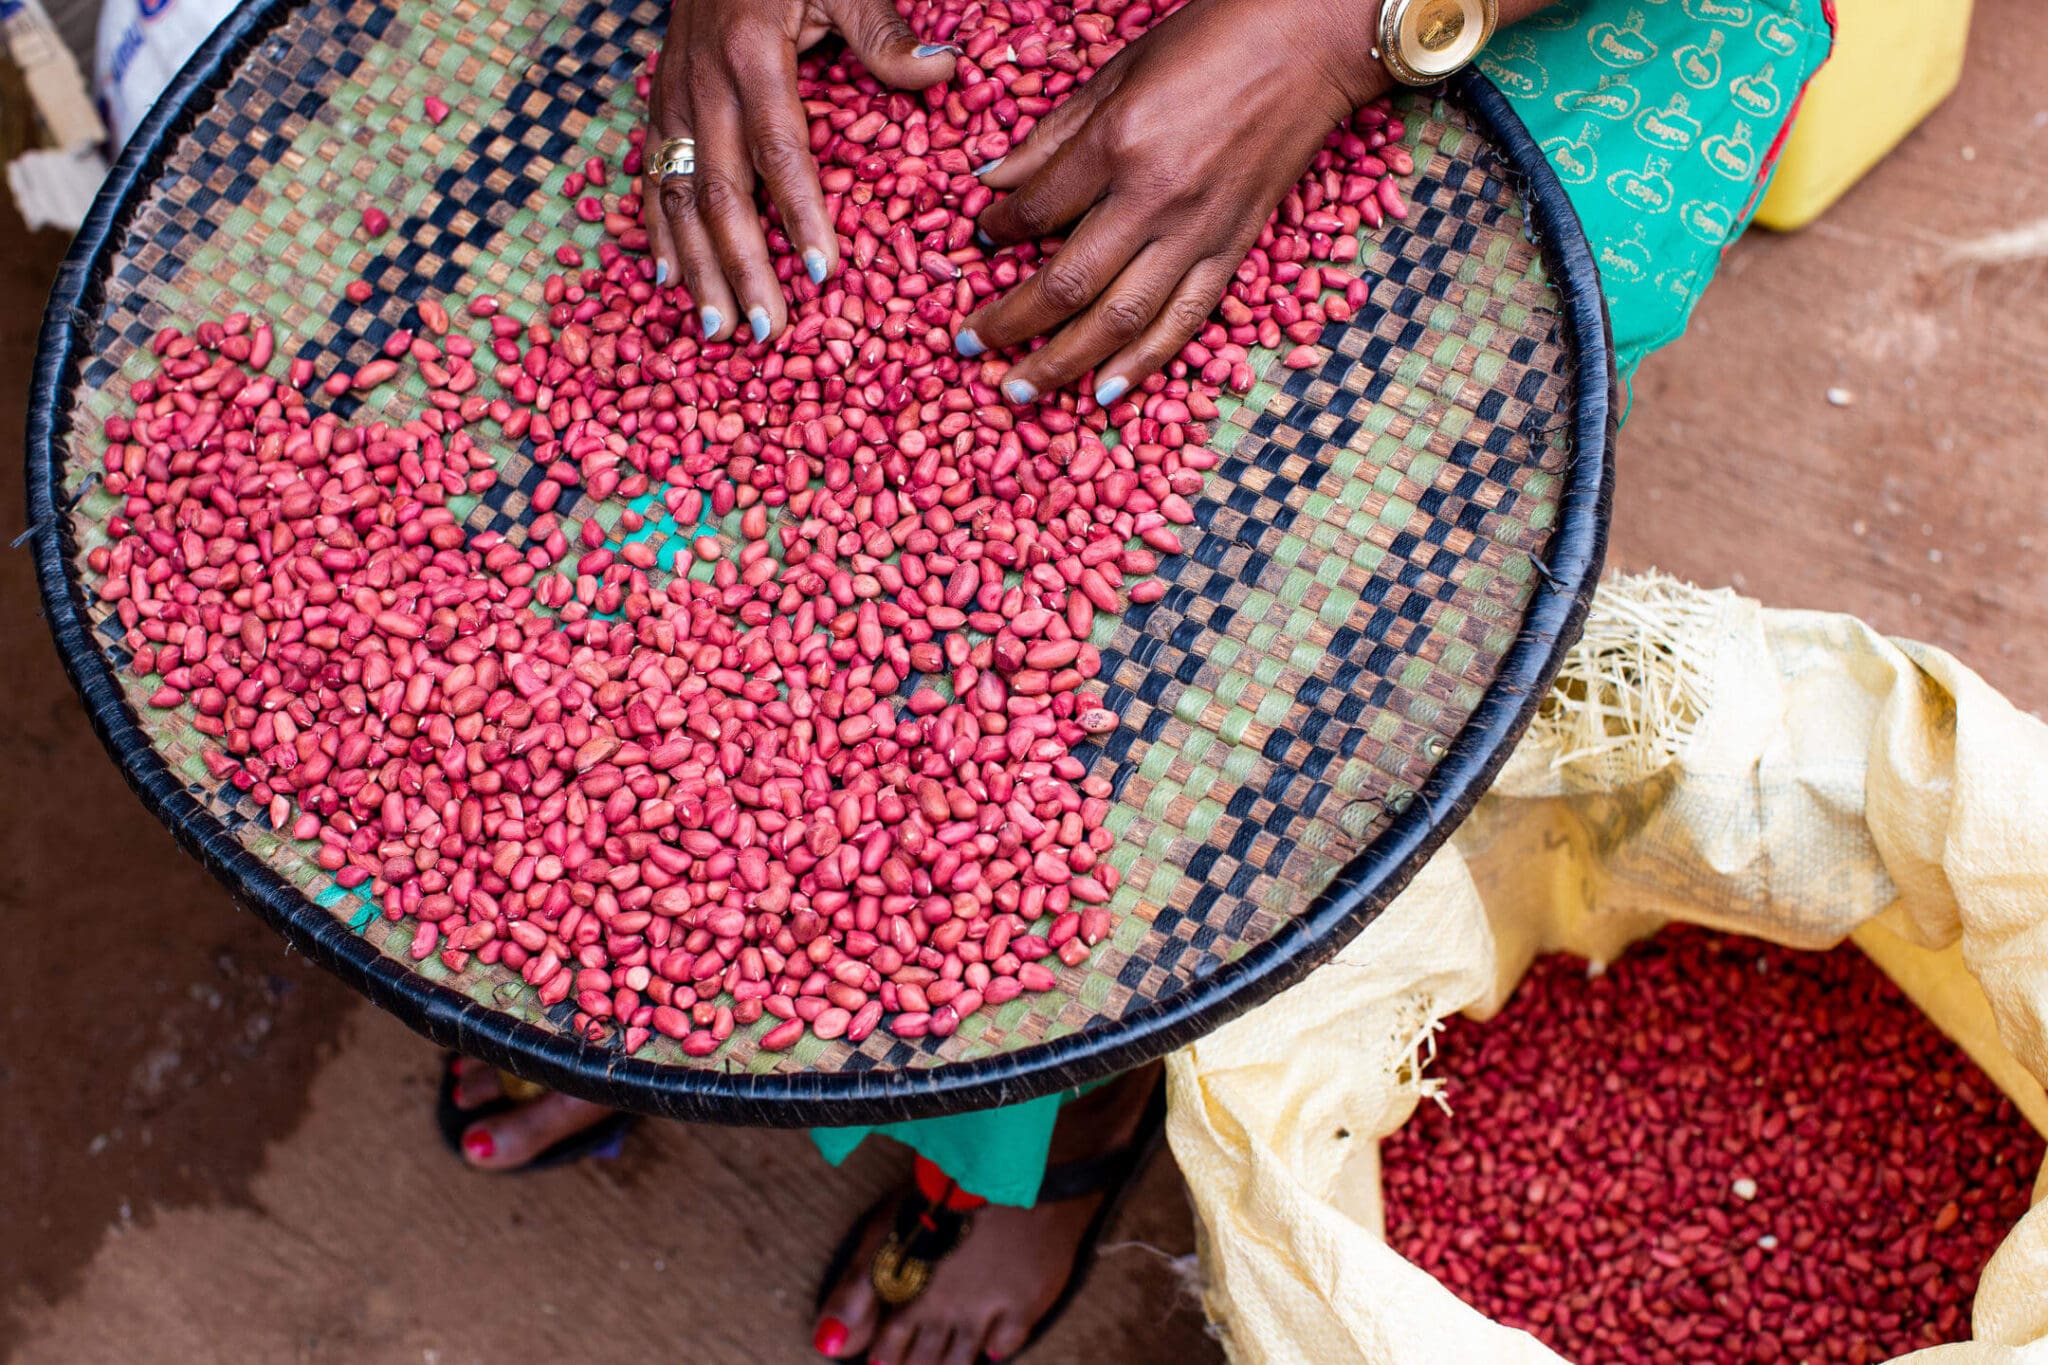 A Rwandan lady selling her seeds at a local market.